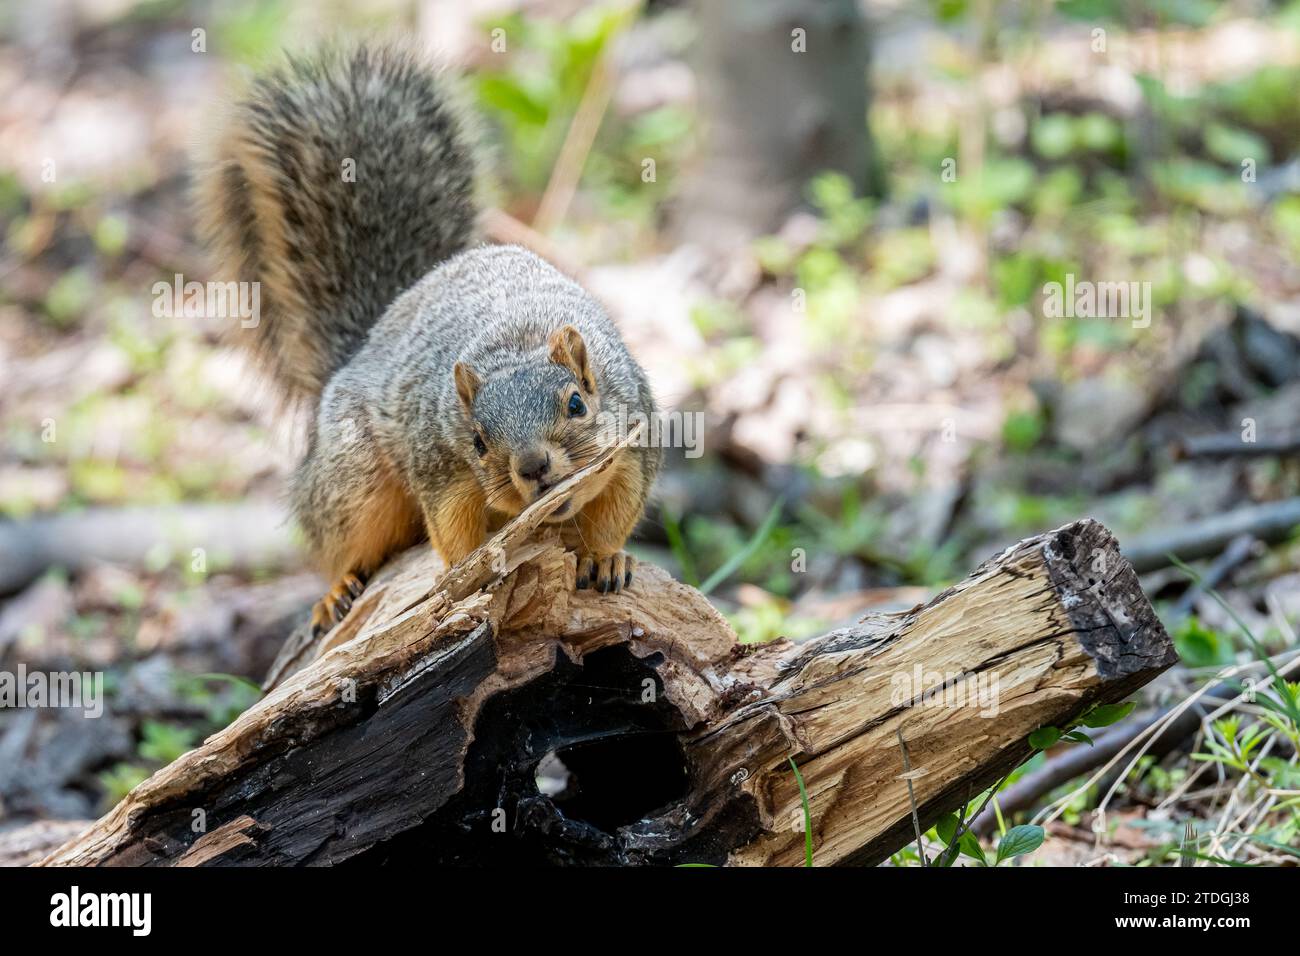 A fox squirrel (Sciurus niger) bites a branch on a downed tree  in the forest in the Spring in Michigan, USA. Stock Photo